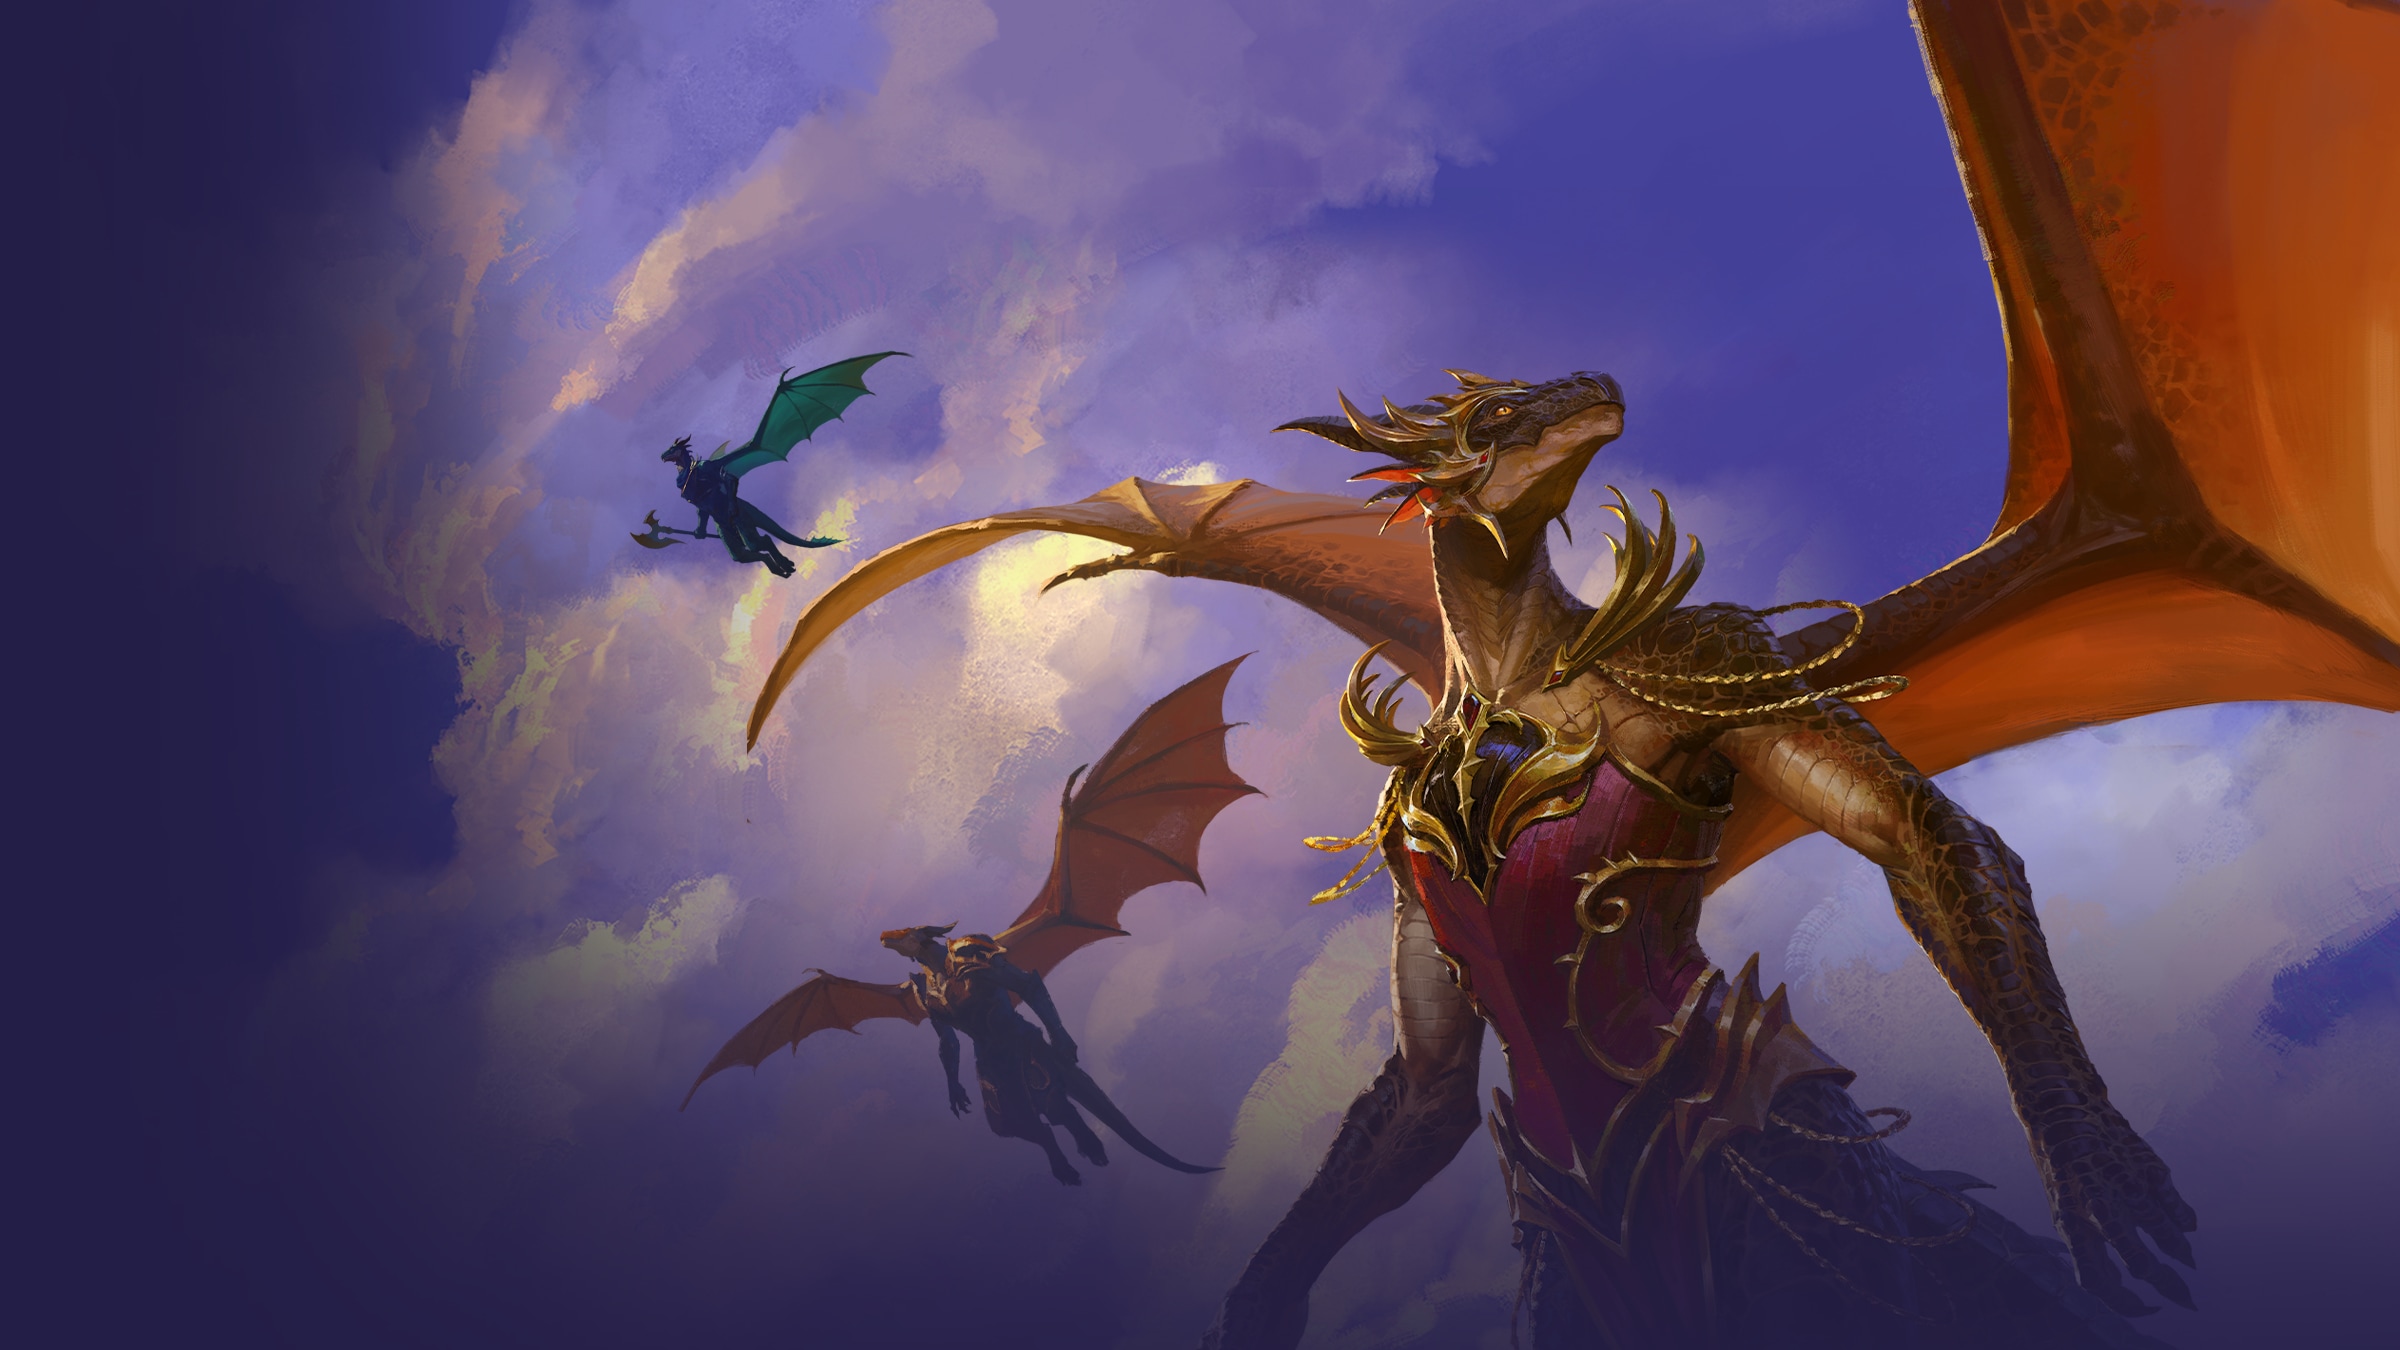 Play the Dragonflight Free Trial This Weekend